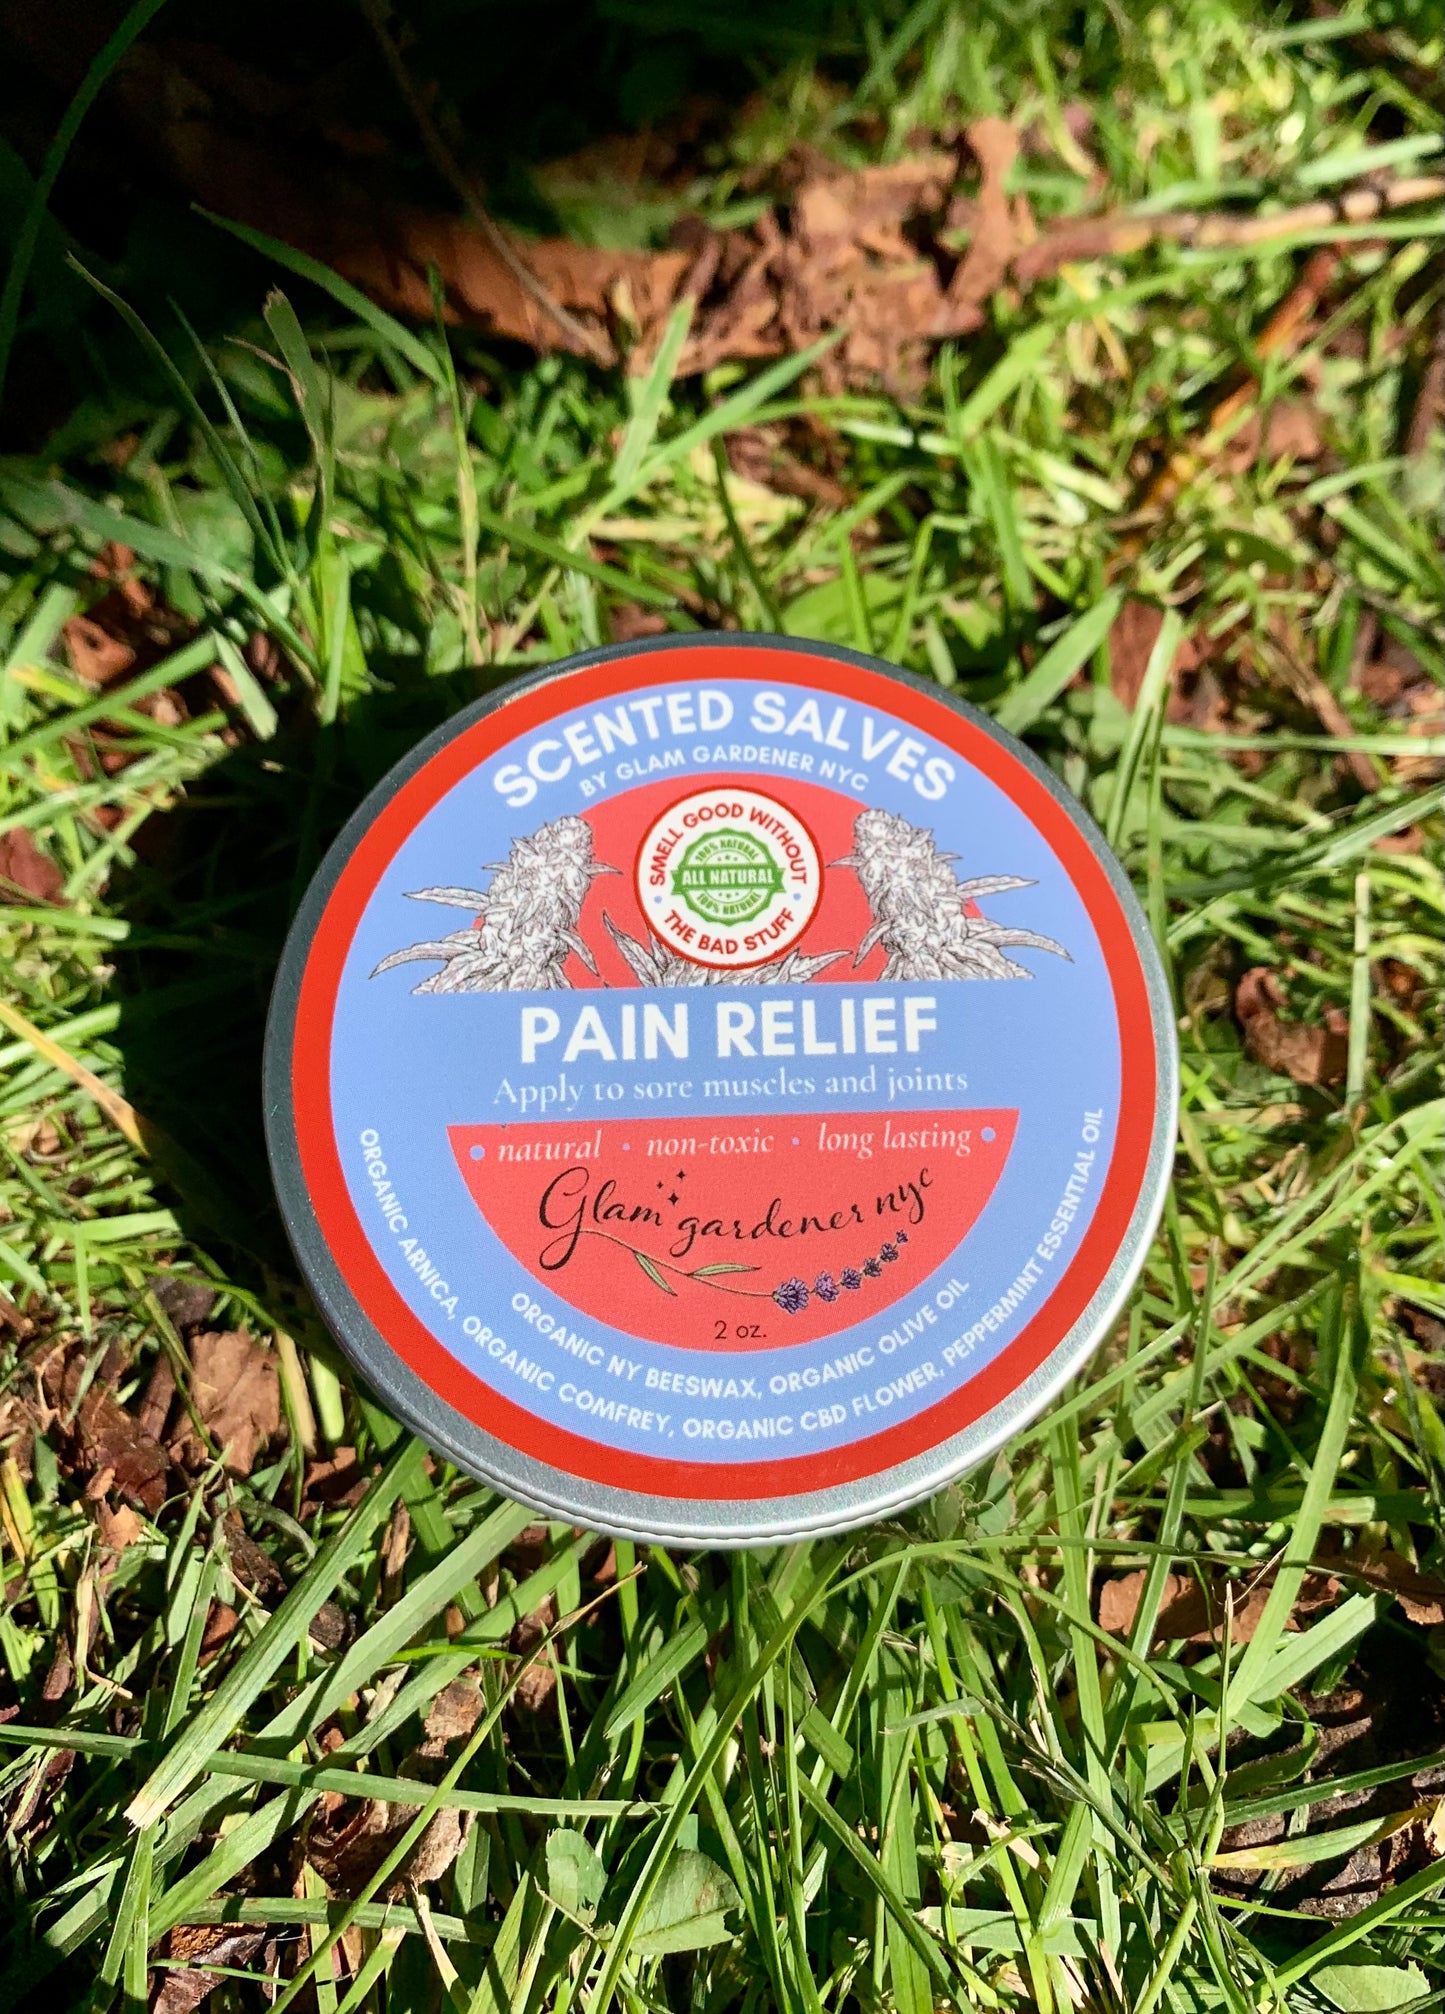 Pain Relief scented salve, healing lotion, and natural perfume with organic arnica, organic comfrey, and organic CBD for natural joint and muscle pain relief